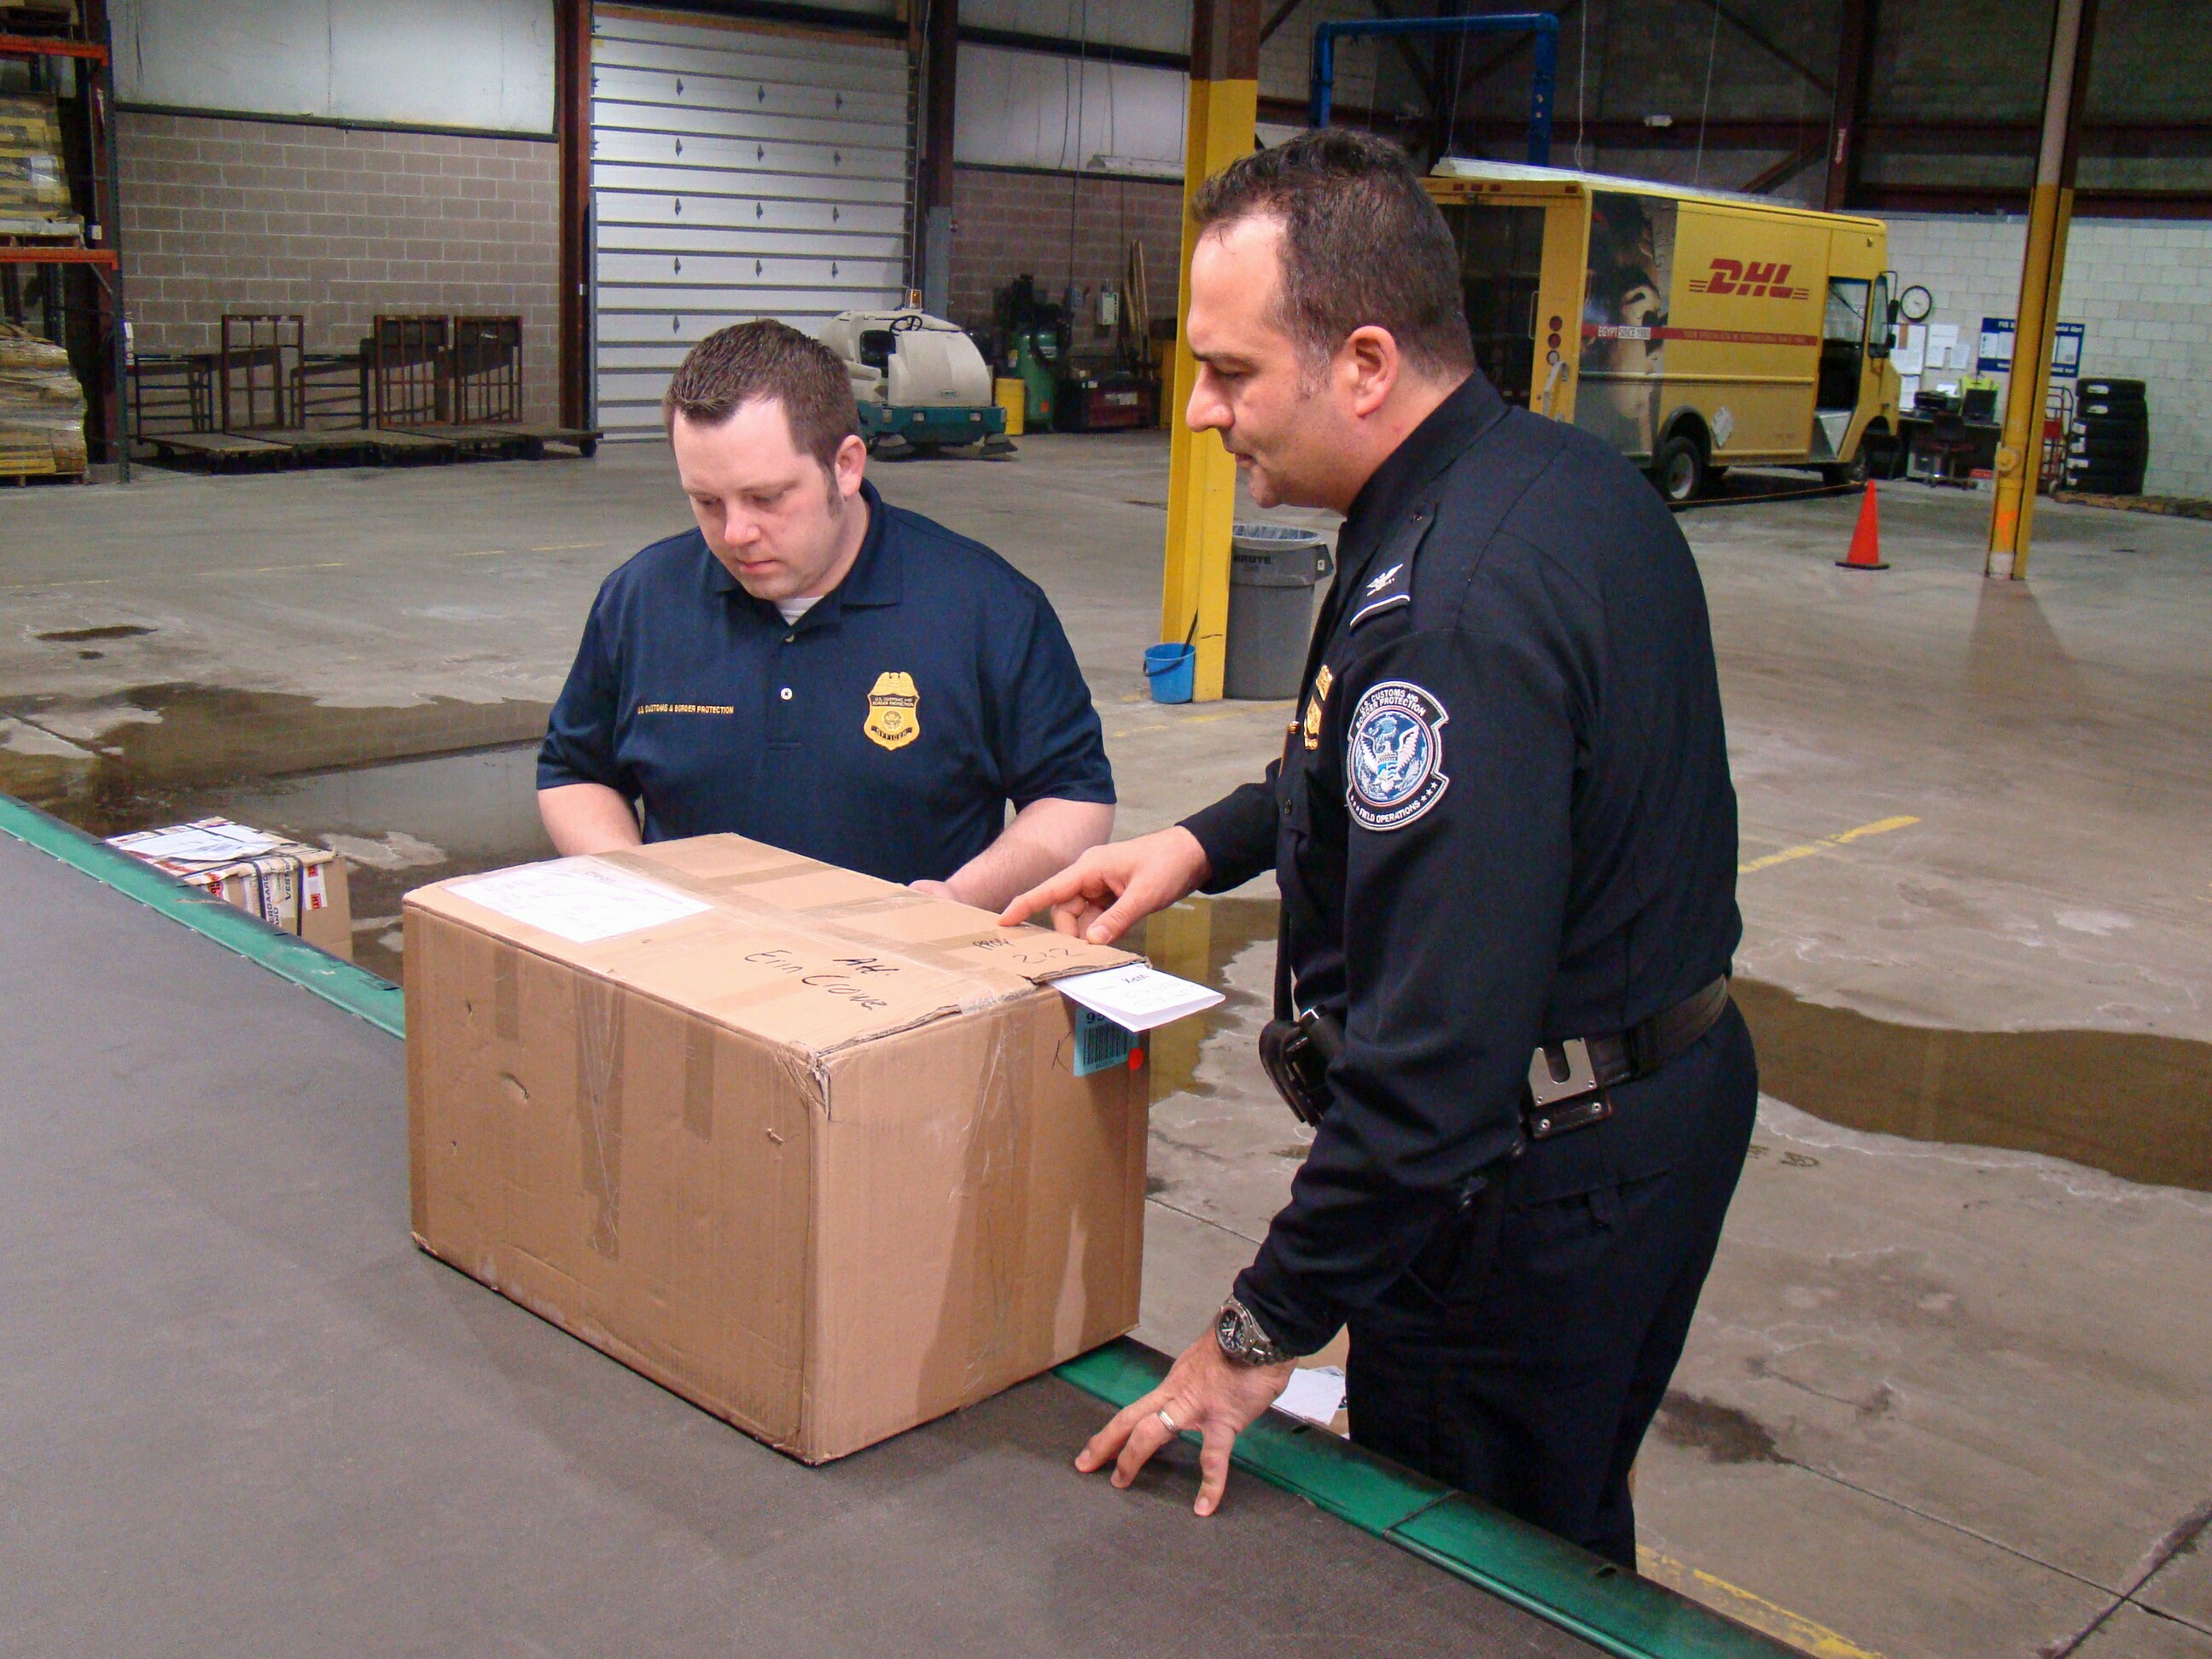 CBP Assistant Area Port Director of Cleveland Eugene Matho, right, and CBP Import Specialist John Parkinson prepare to inspect a shipment of suspected counterfeit DVDs at the DHL Express Courier Distribution Center in Cleveland. Photo by Gary Chaffee